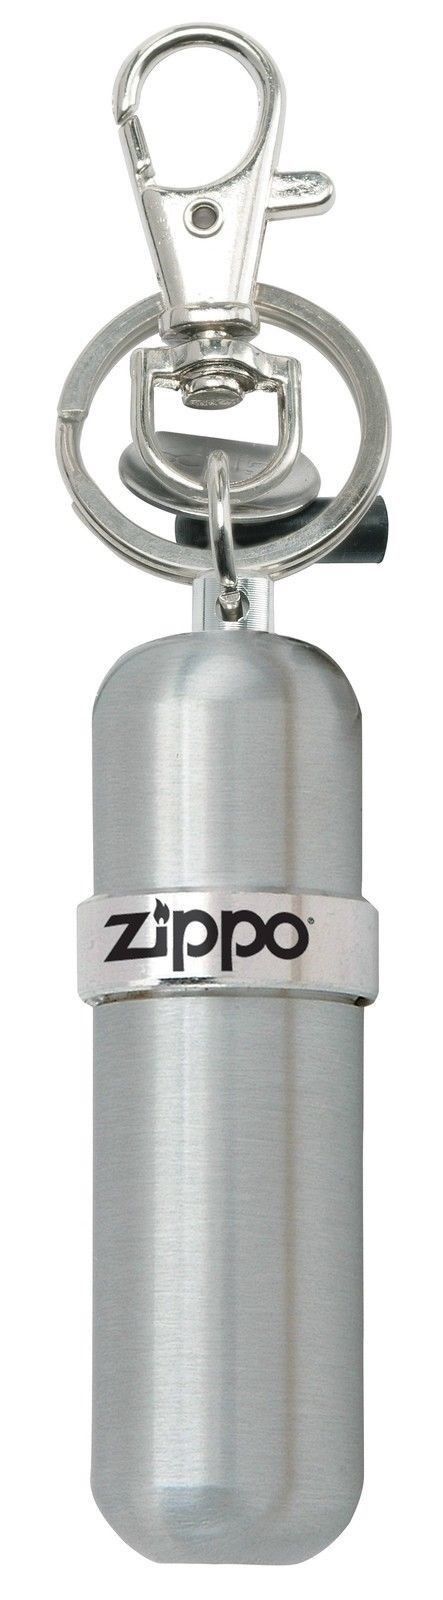 Zippo Fuel Canister with Key Ring, High Polished Silver, 121503, New In Box